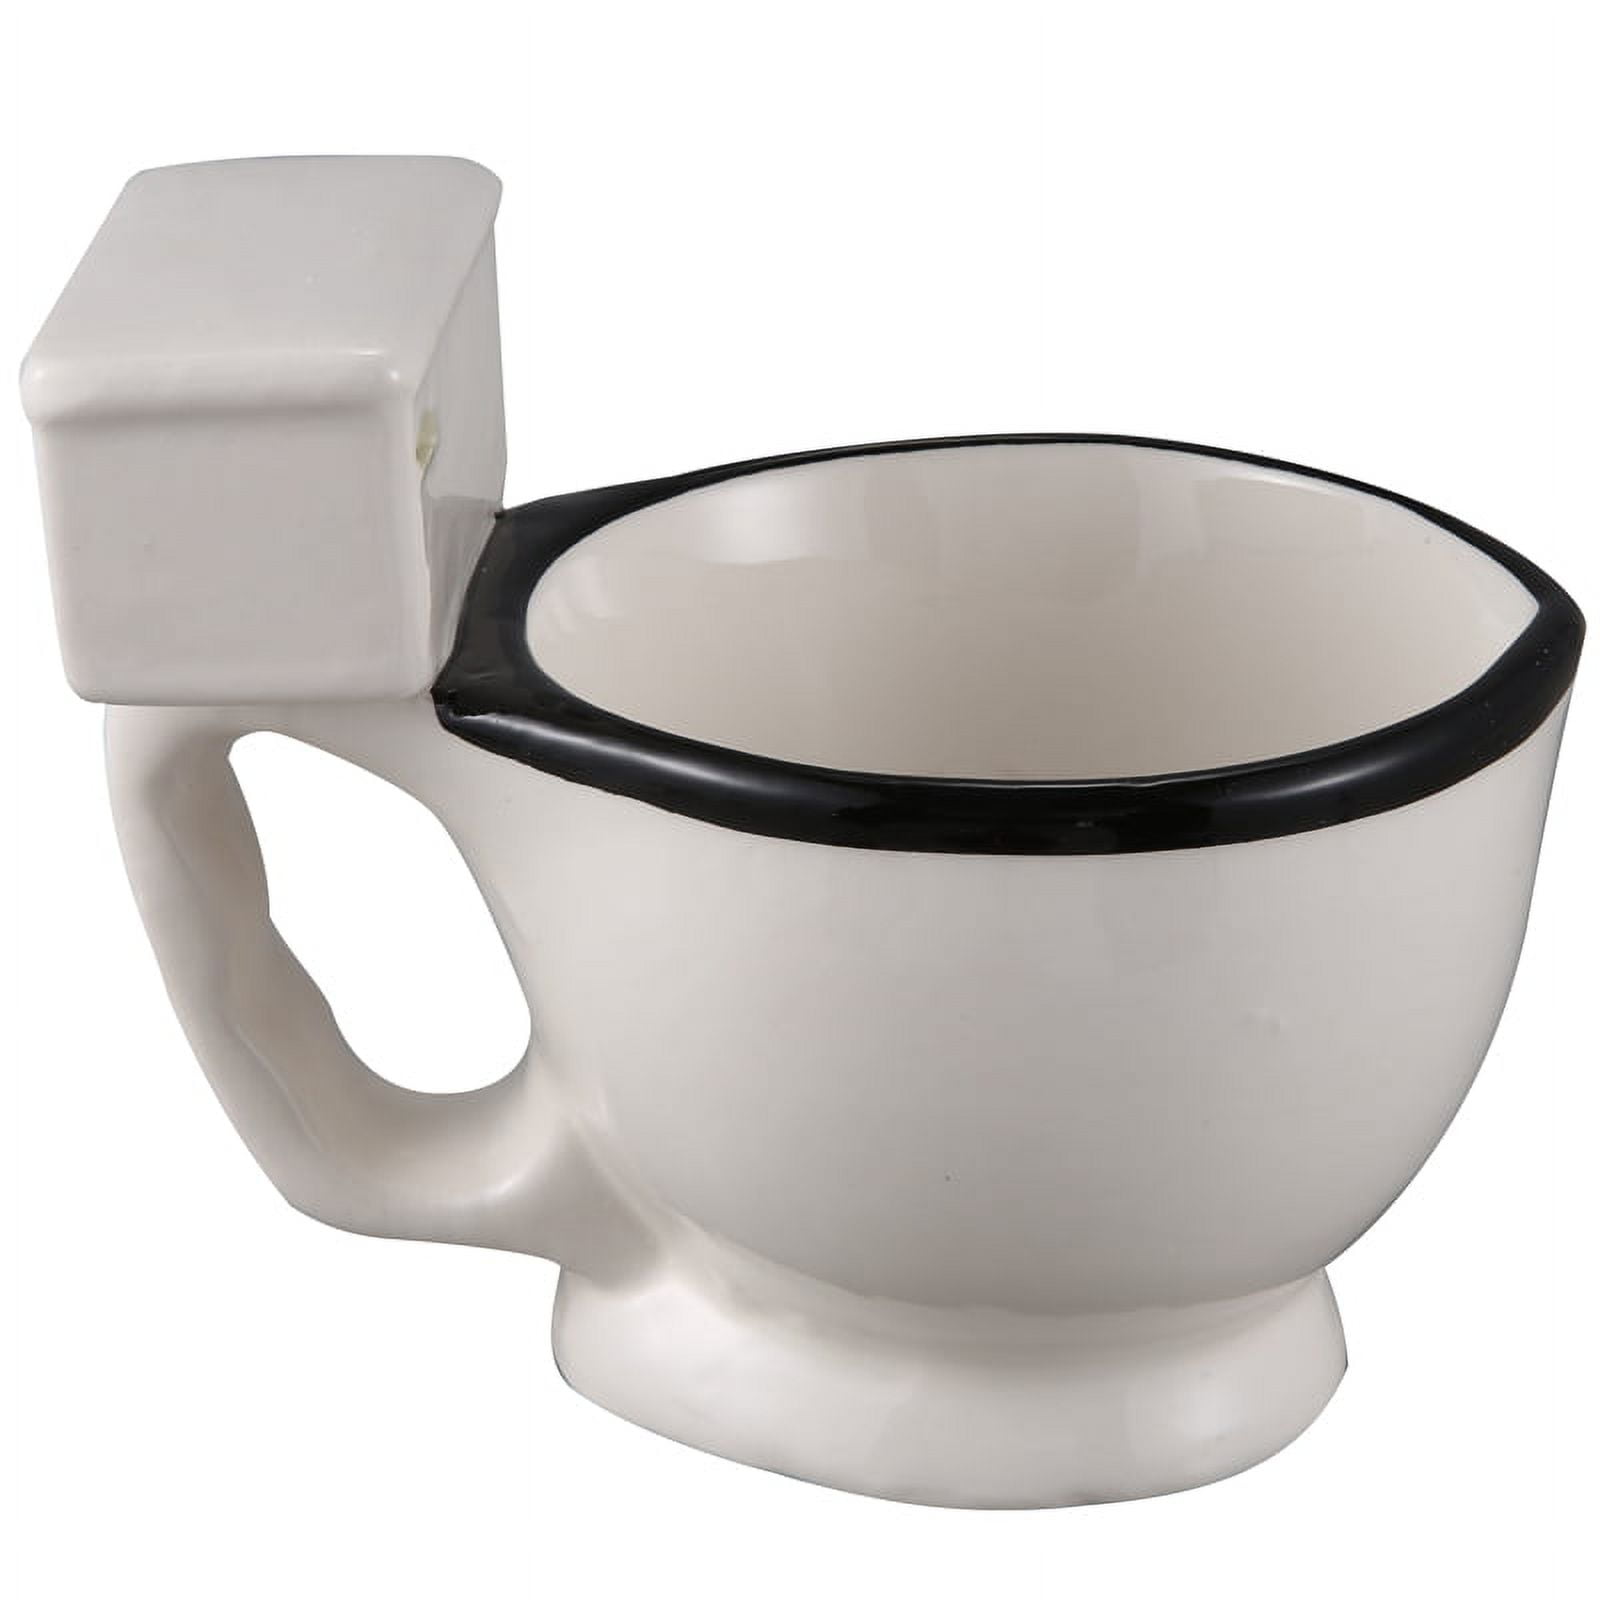 Novelty Toilet Ceramic Mug with Handle 300ml Coffee Tea Milk Ice Cream Cup Funny for Gifts, Silver